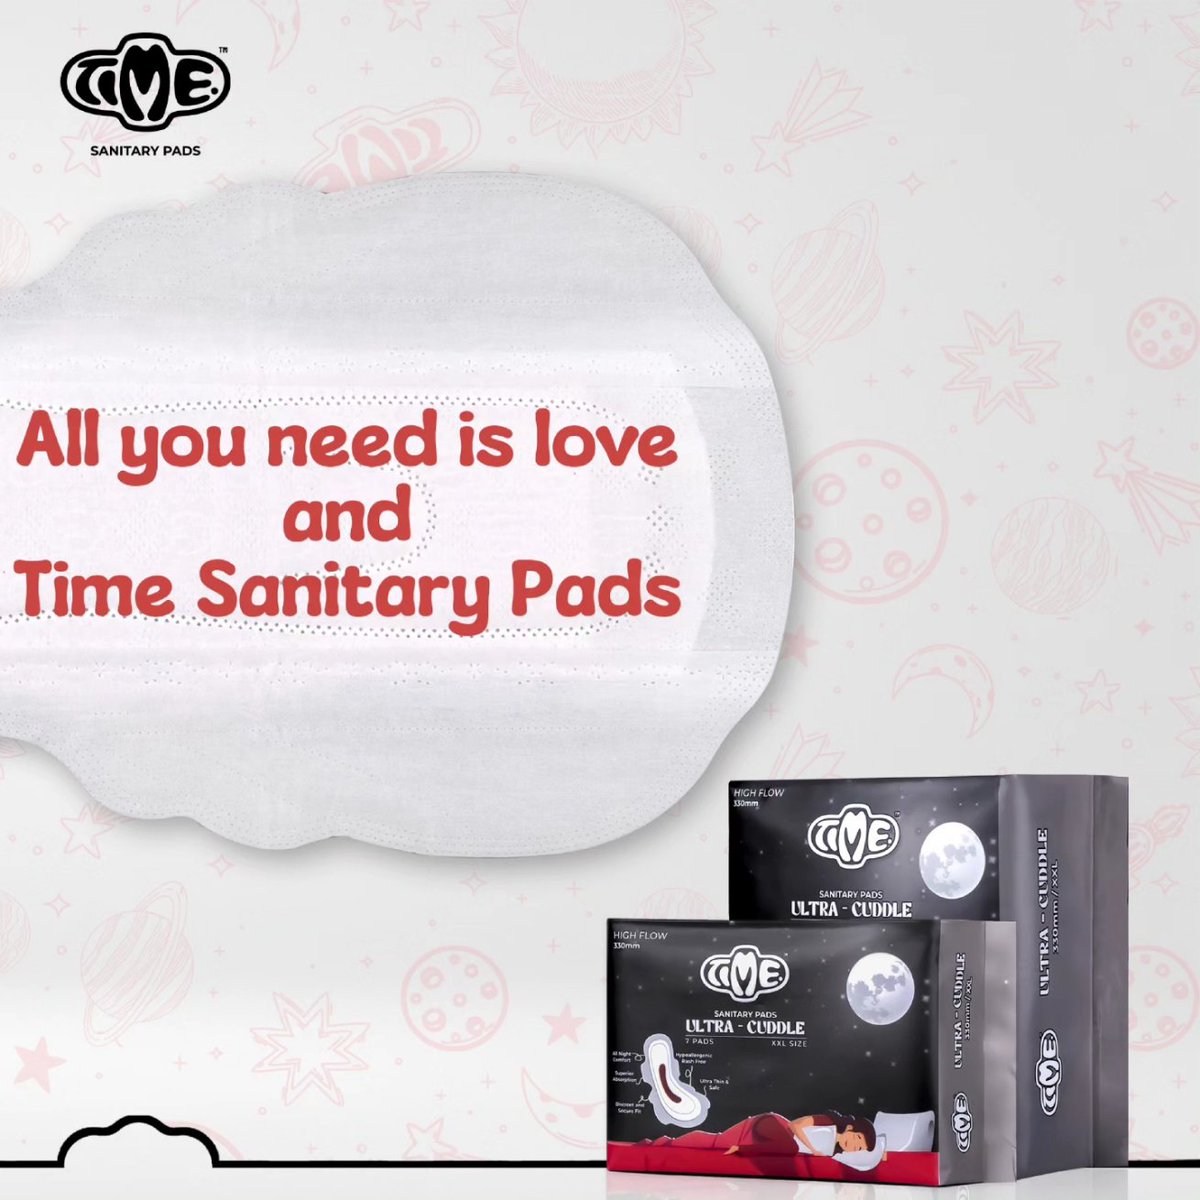 Embrace comfort with Time Sanitary Pads. For a caring touch during your cycle, visit timepads.in

#periods #menstruation #periodsbelike #menstruationmatters #periodpositive #menstrualcycle #periodstories #periodtalk #periodproblems #periodcramps #menstrualhealth